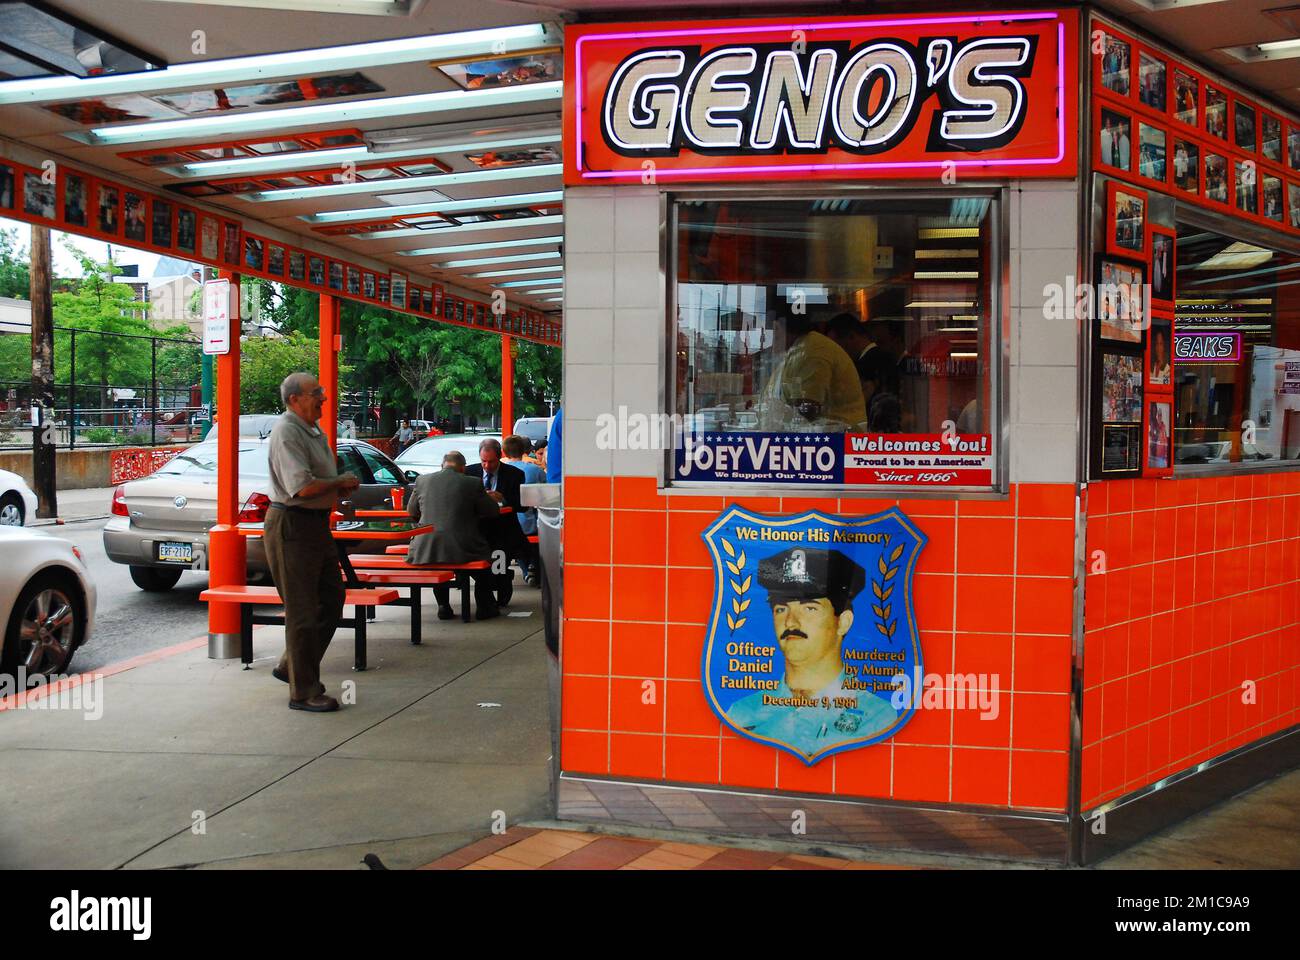 A memorial to a police officer killed in the line of duty hangs on the wall at Geno's Steaks, a famous cheesesteak stand in South Philly Philadelphia Stock Photo